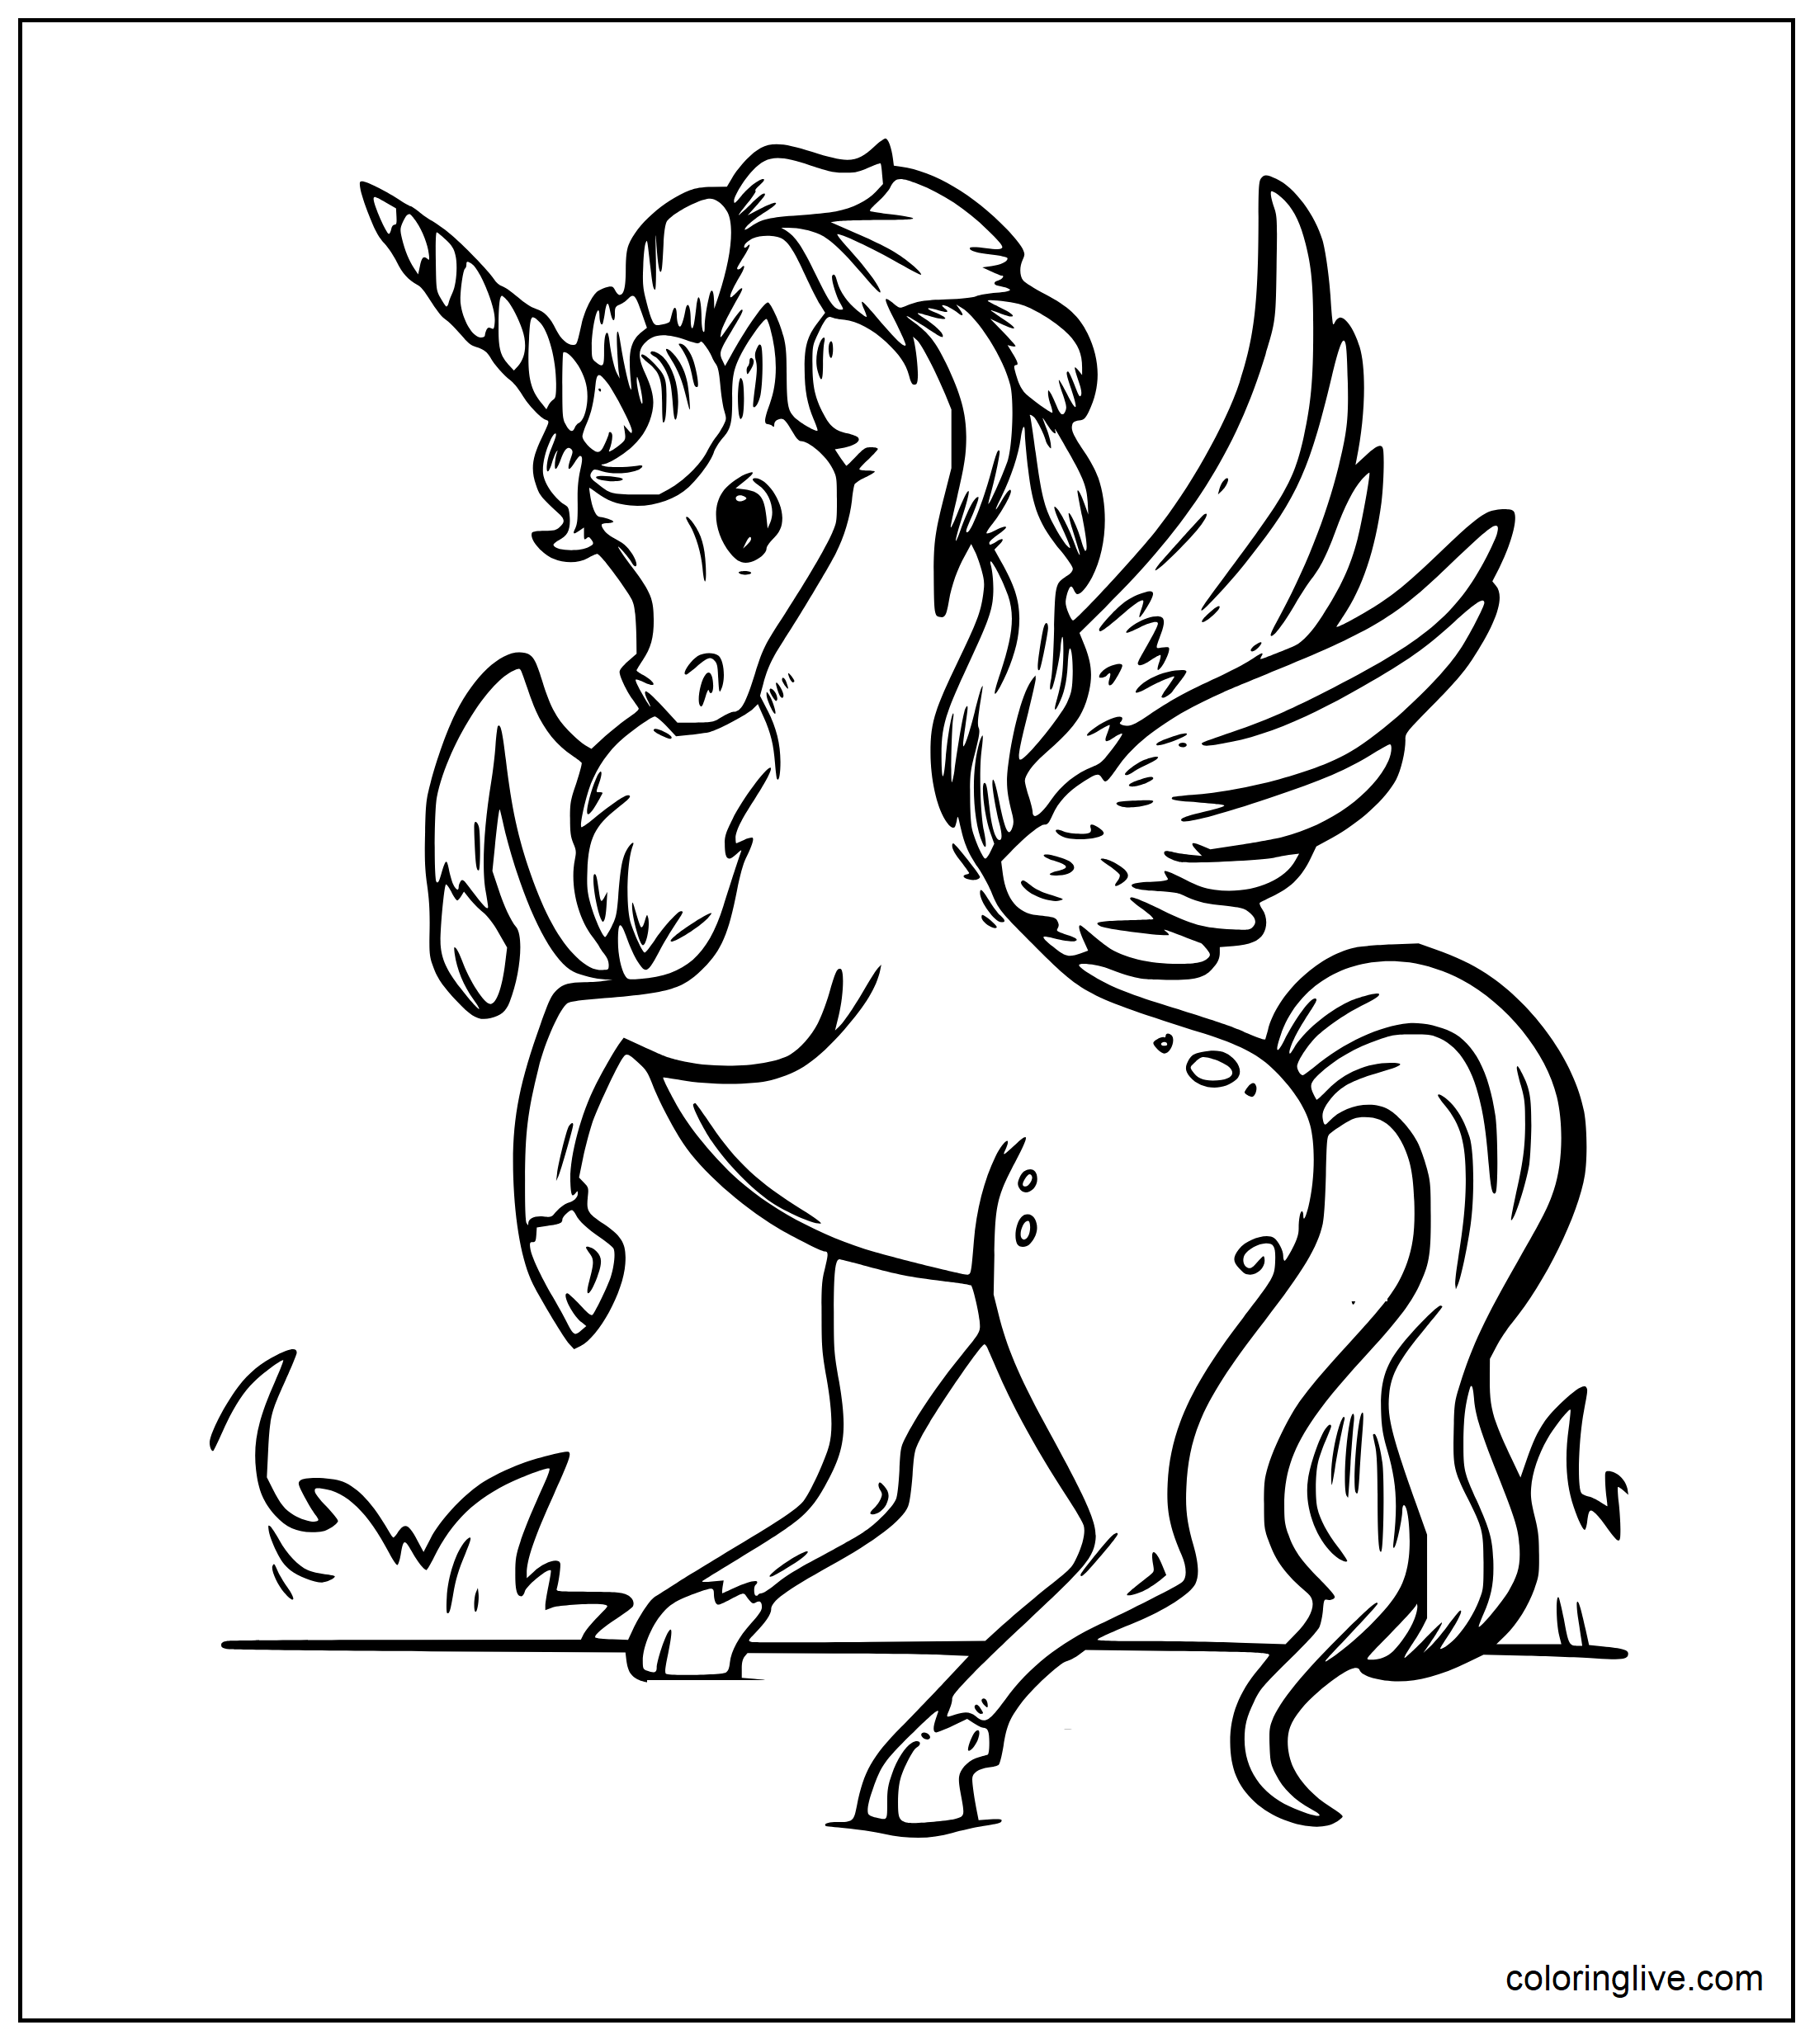 Printable Sweet Alicorn to color Coloring Page for kids.